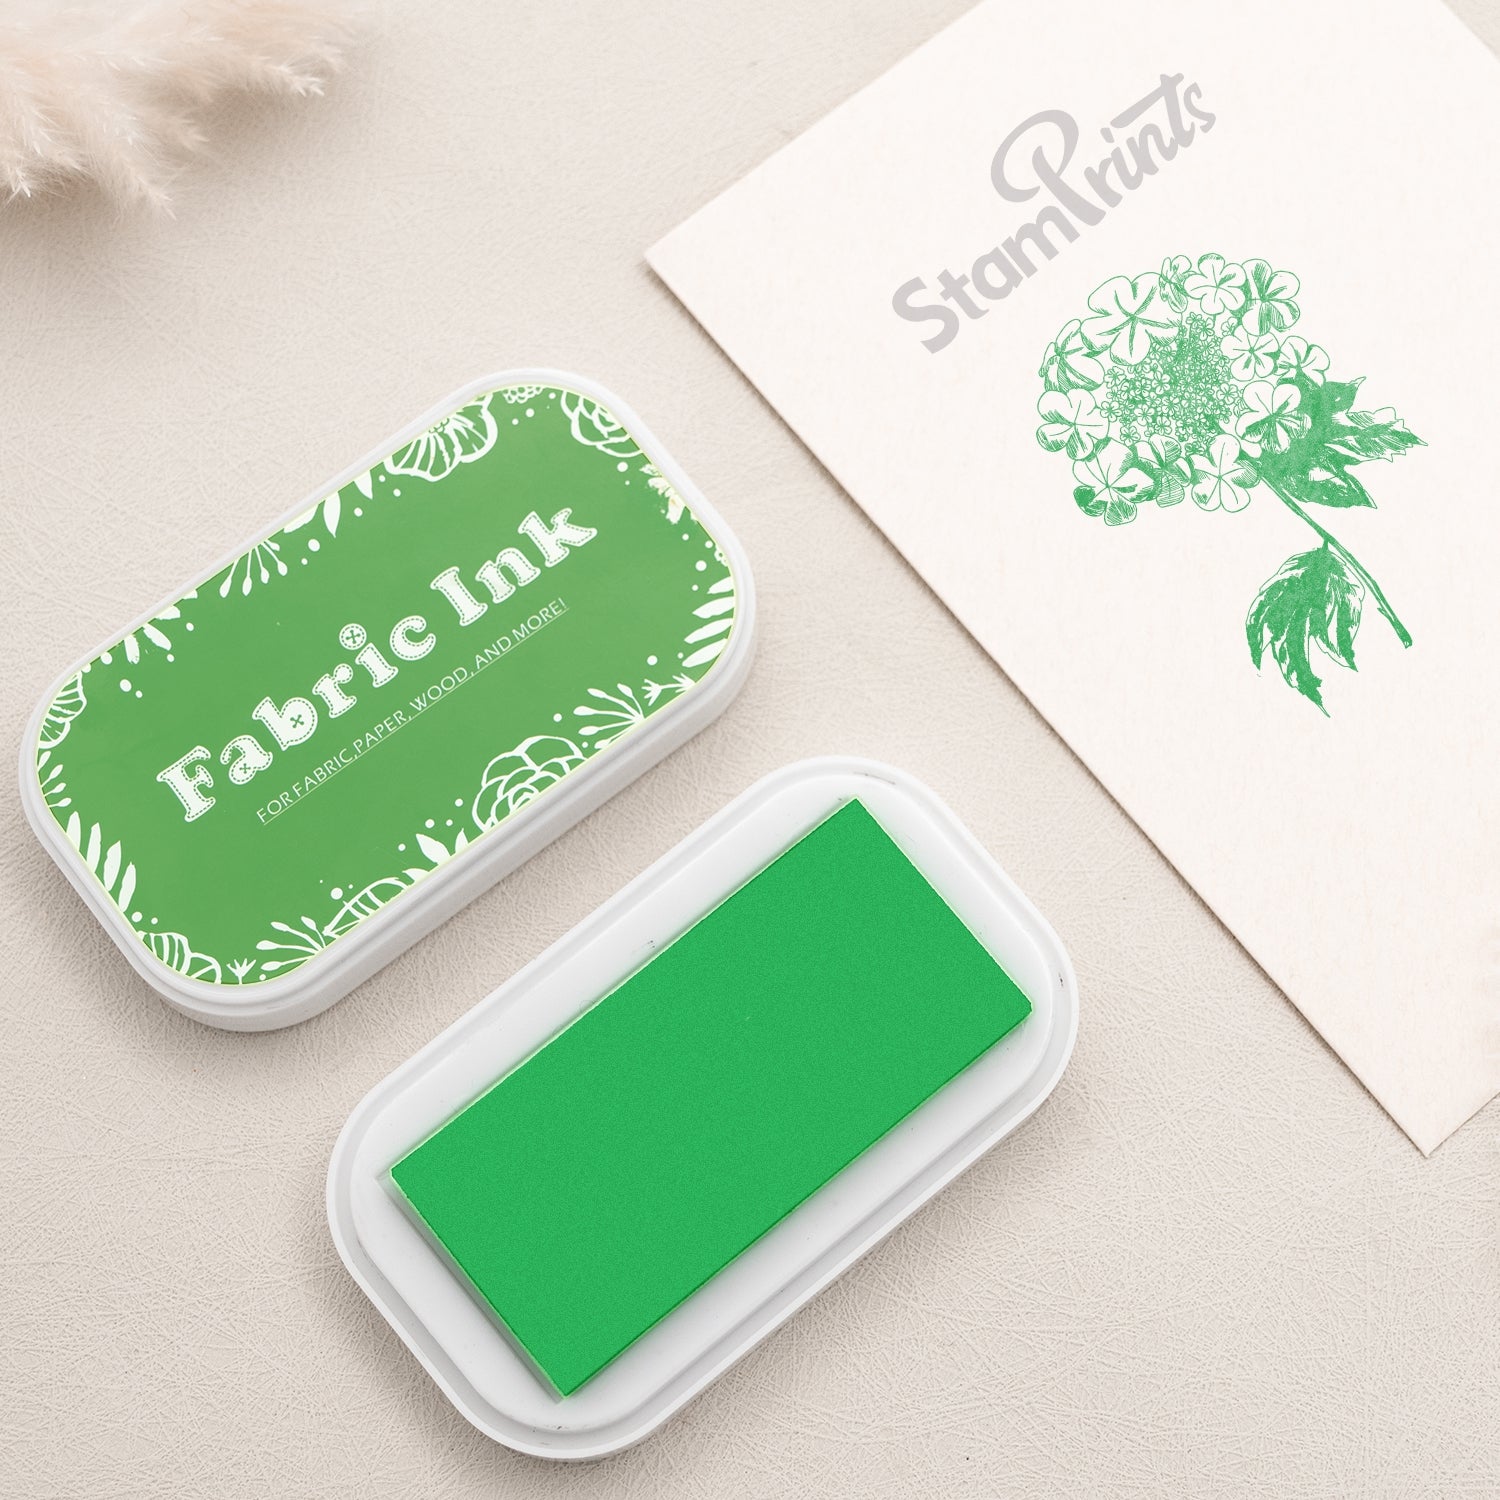 Spring Green Oil-Based Fabric Ink Pad - Rubber Stamp Inking Stamp Pad